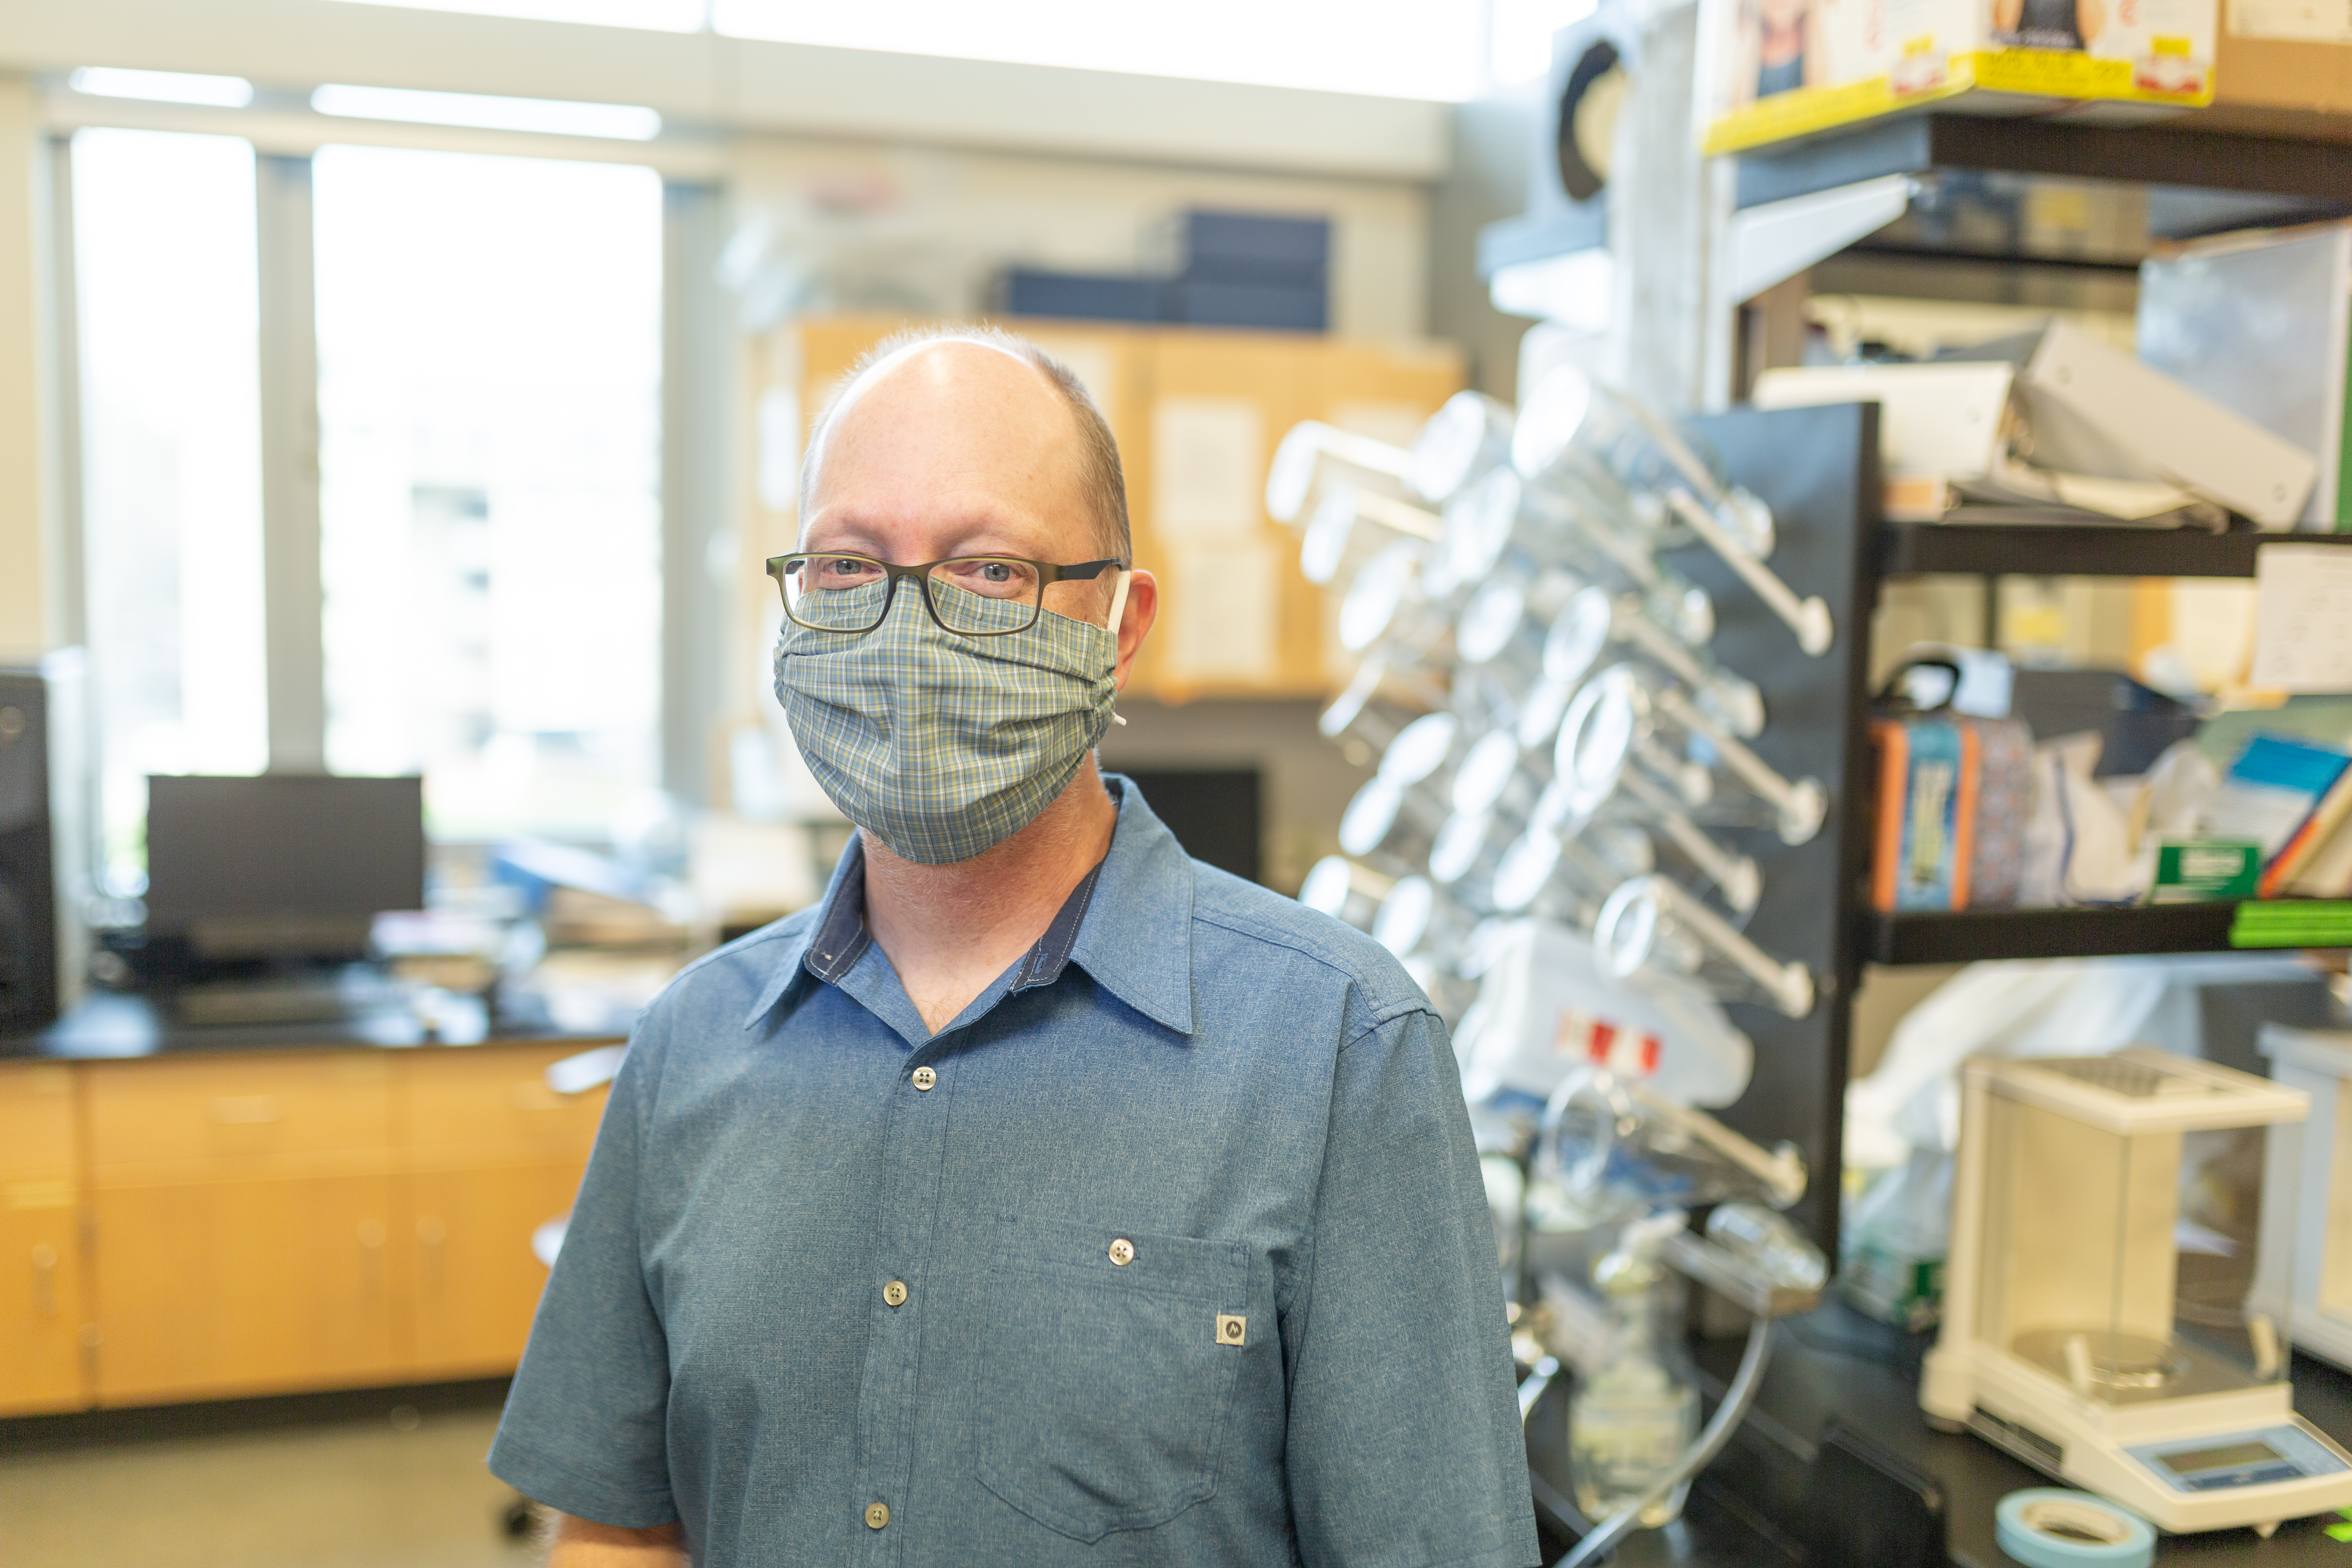 Professor Jeff Grimm, wearing a mask, in his laboratory